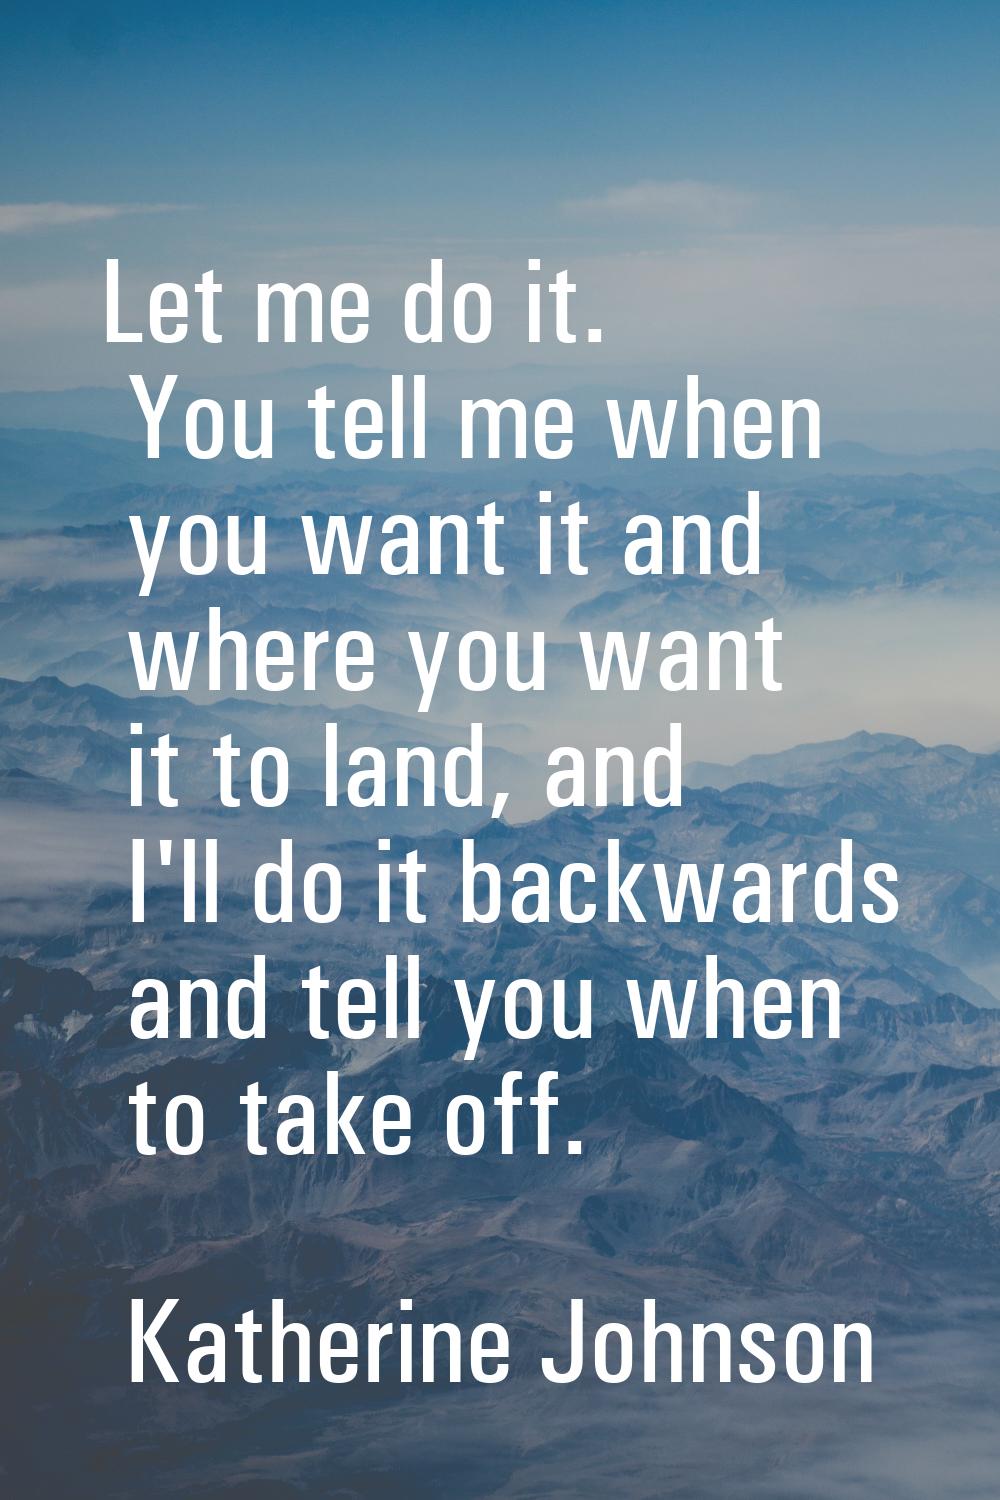 Let me do it. You tell me when you want it and where you want it to land, and I'll do it backwards 